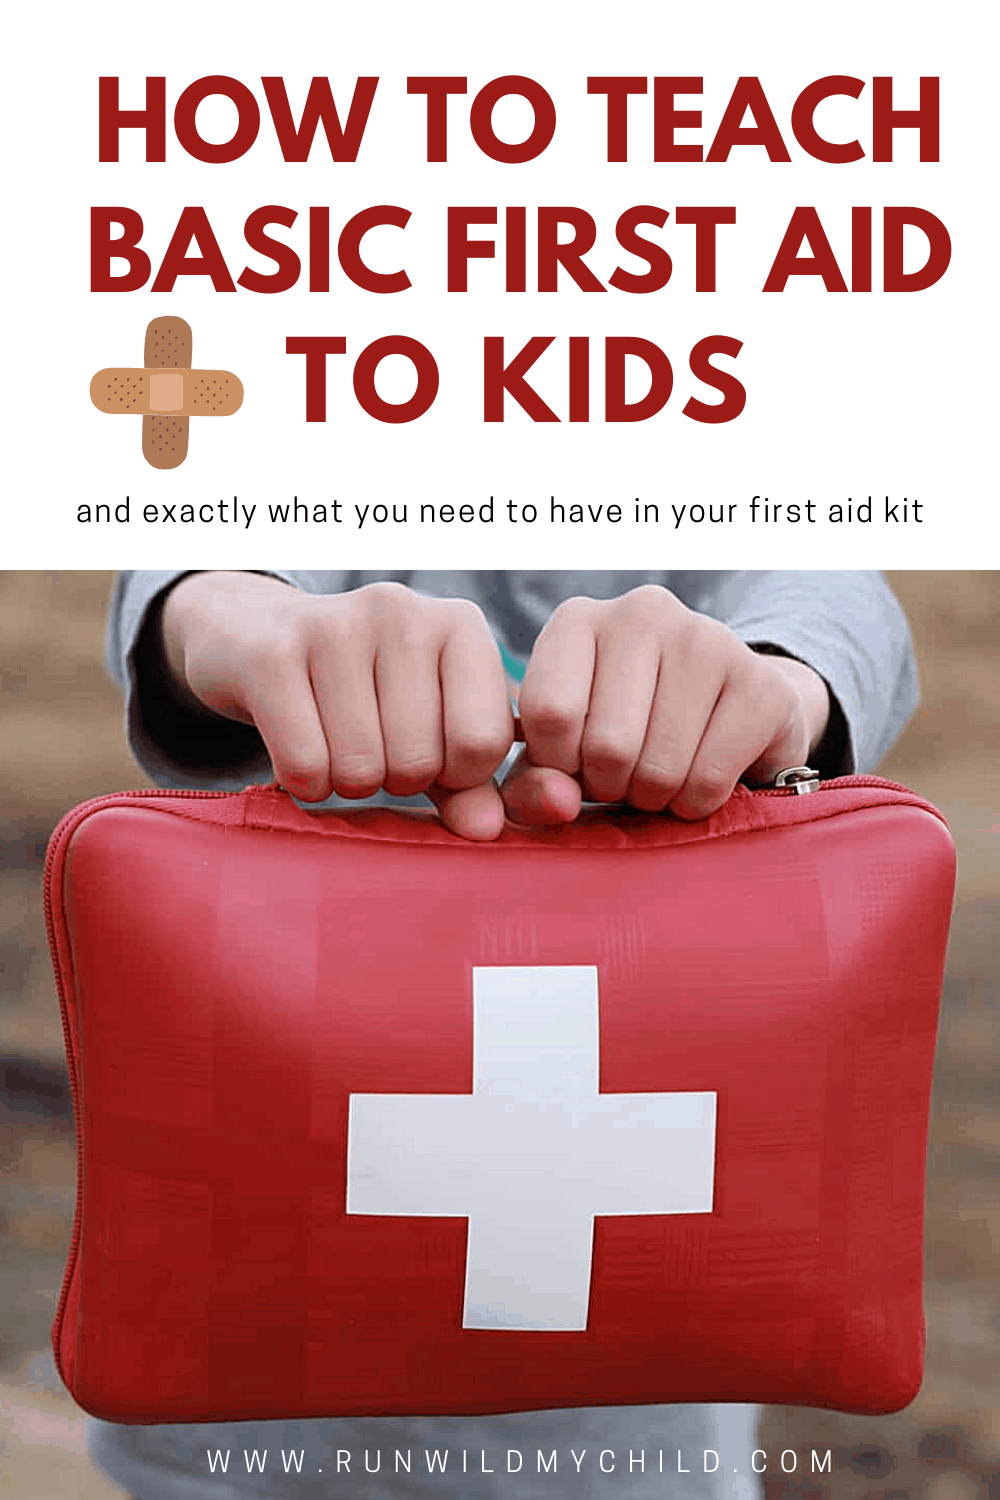 first-aid-kit-for-kids-clearance-sale-save-42-jlcatj-gob-mx